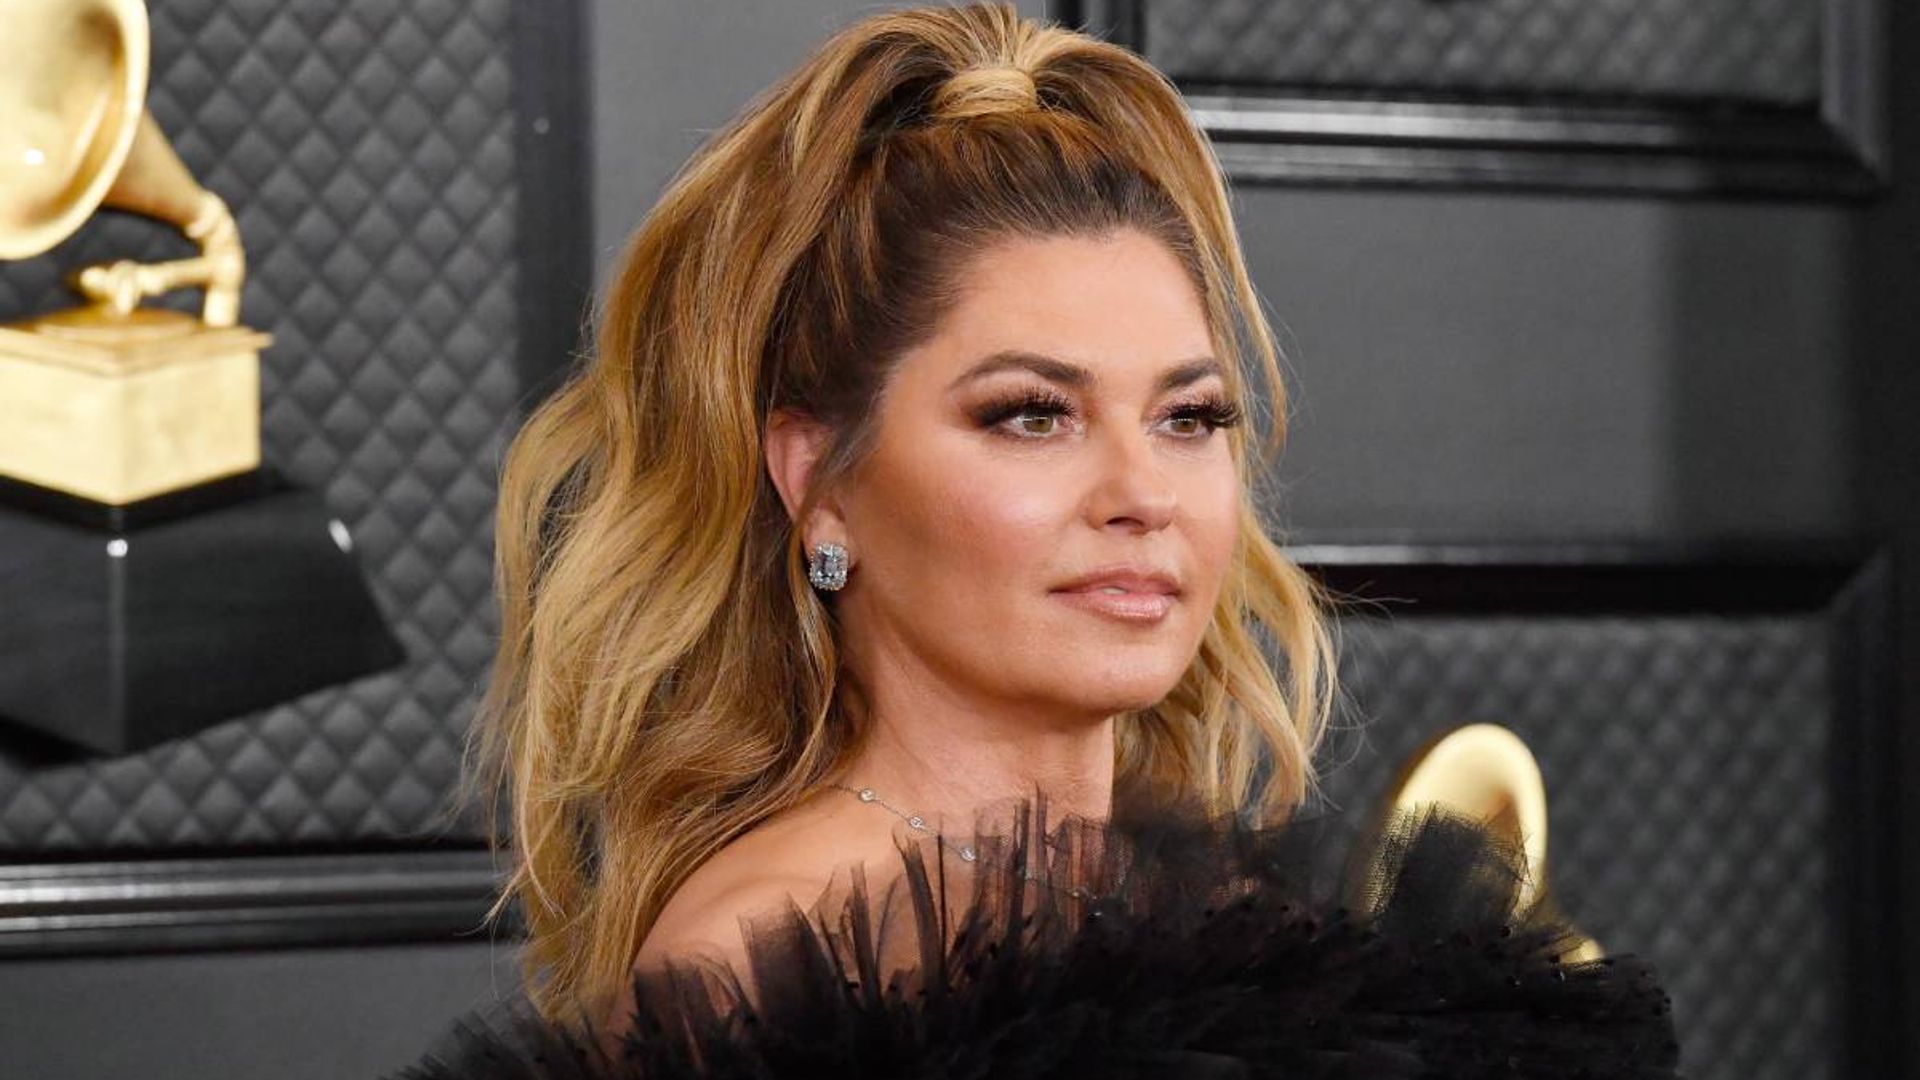 Shania Twain Reflects On Losing Her Ex Husband As A Music Collaborator